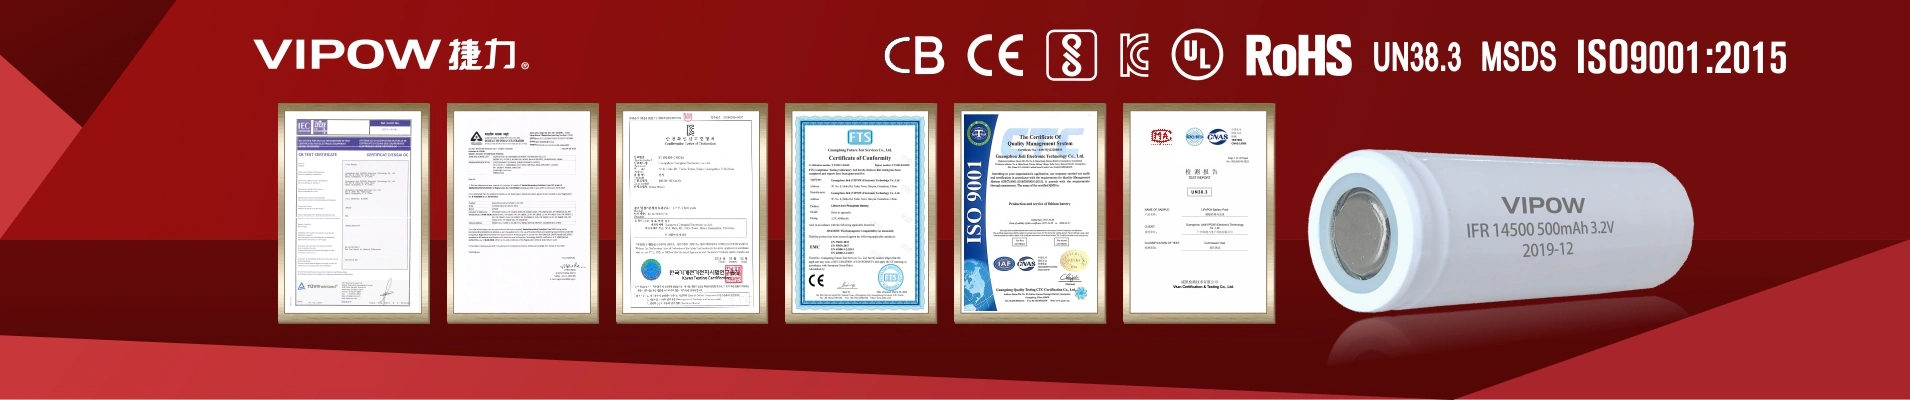 Honor and Certifications